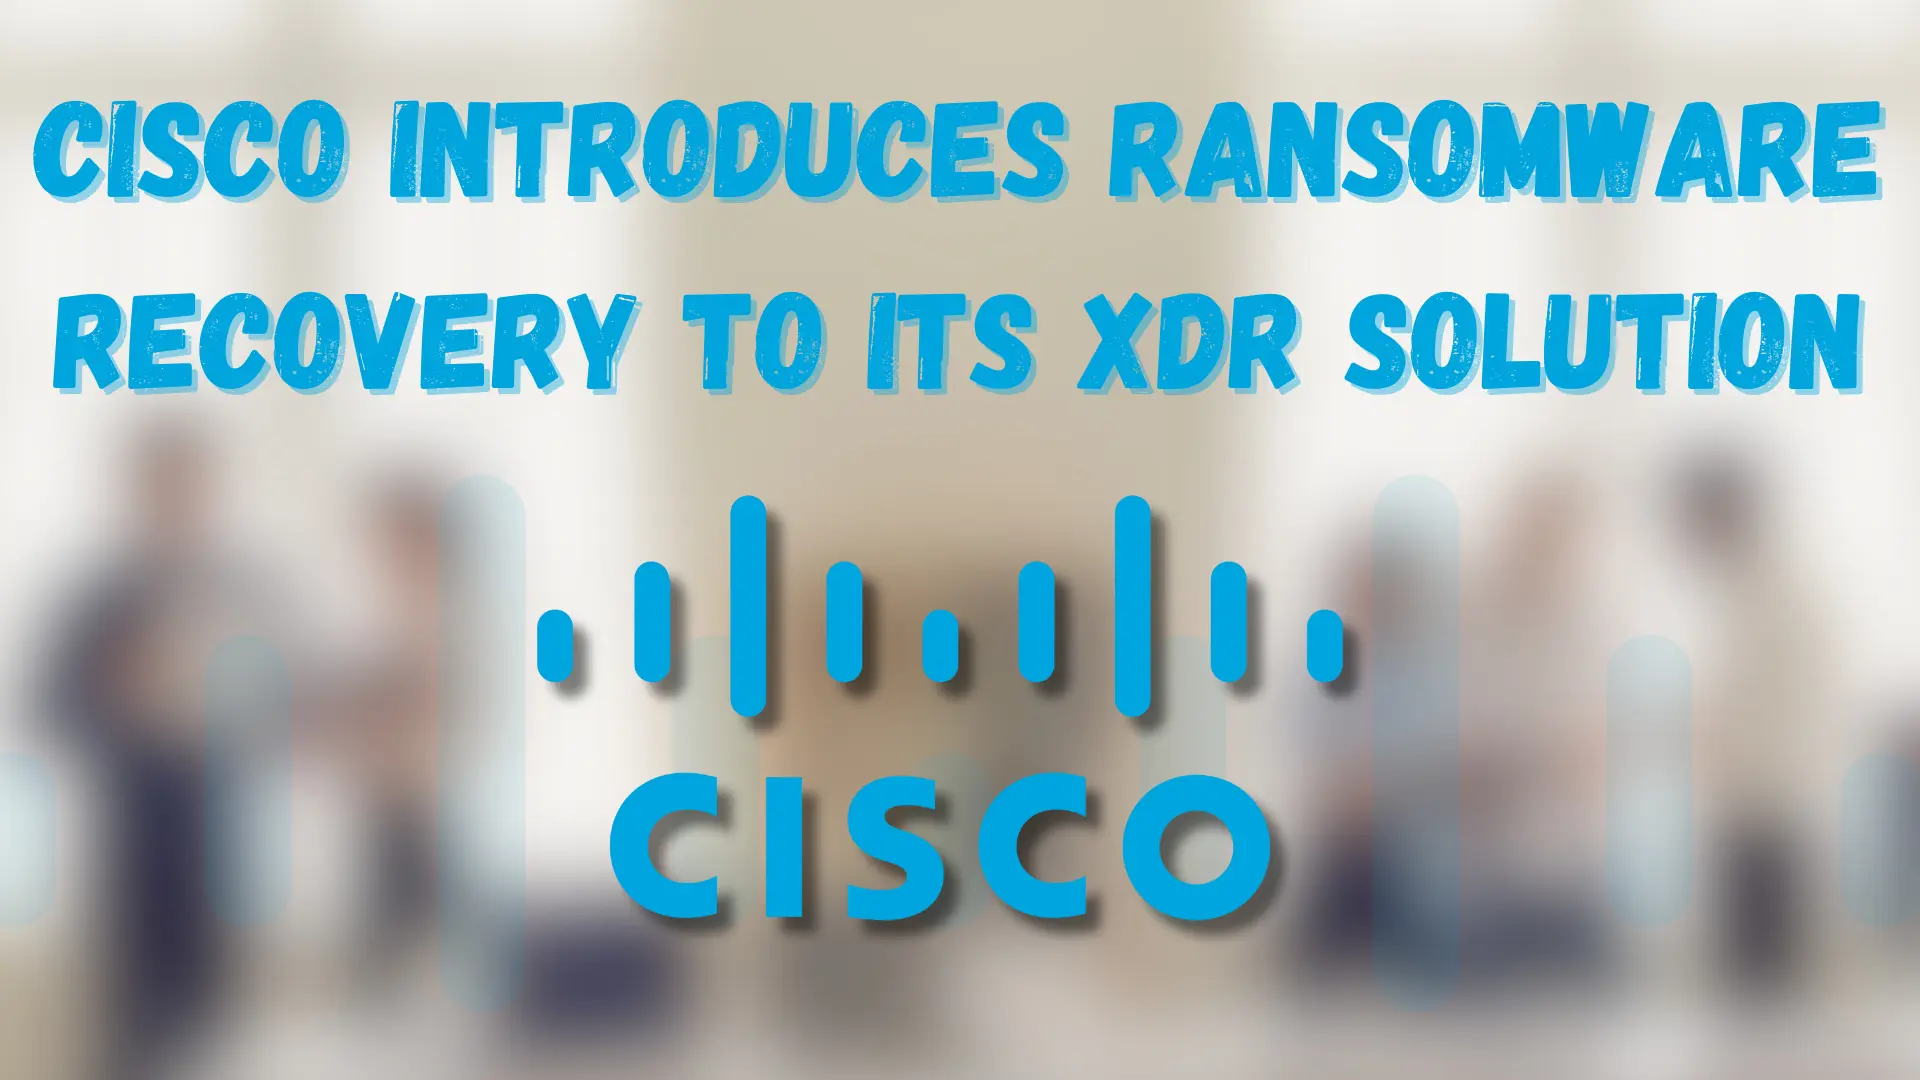 Cisco Introduces Ransomware Recovery to Its XDR Solution